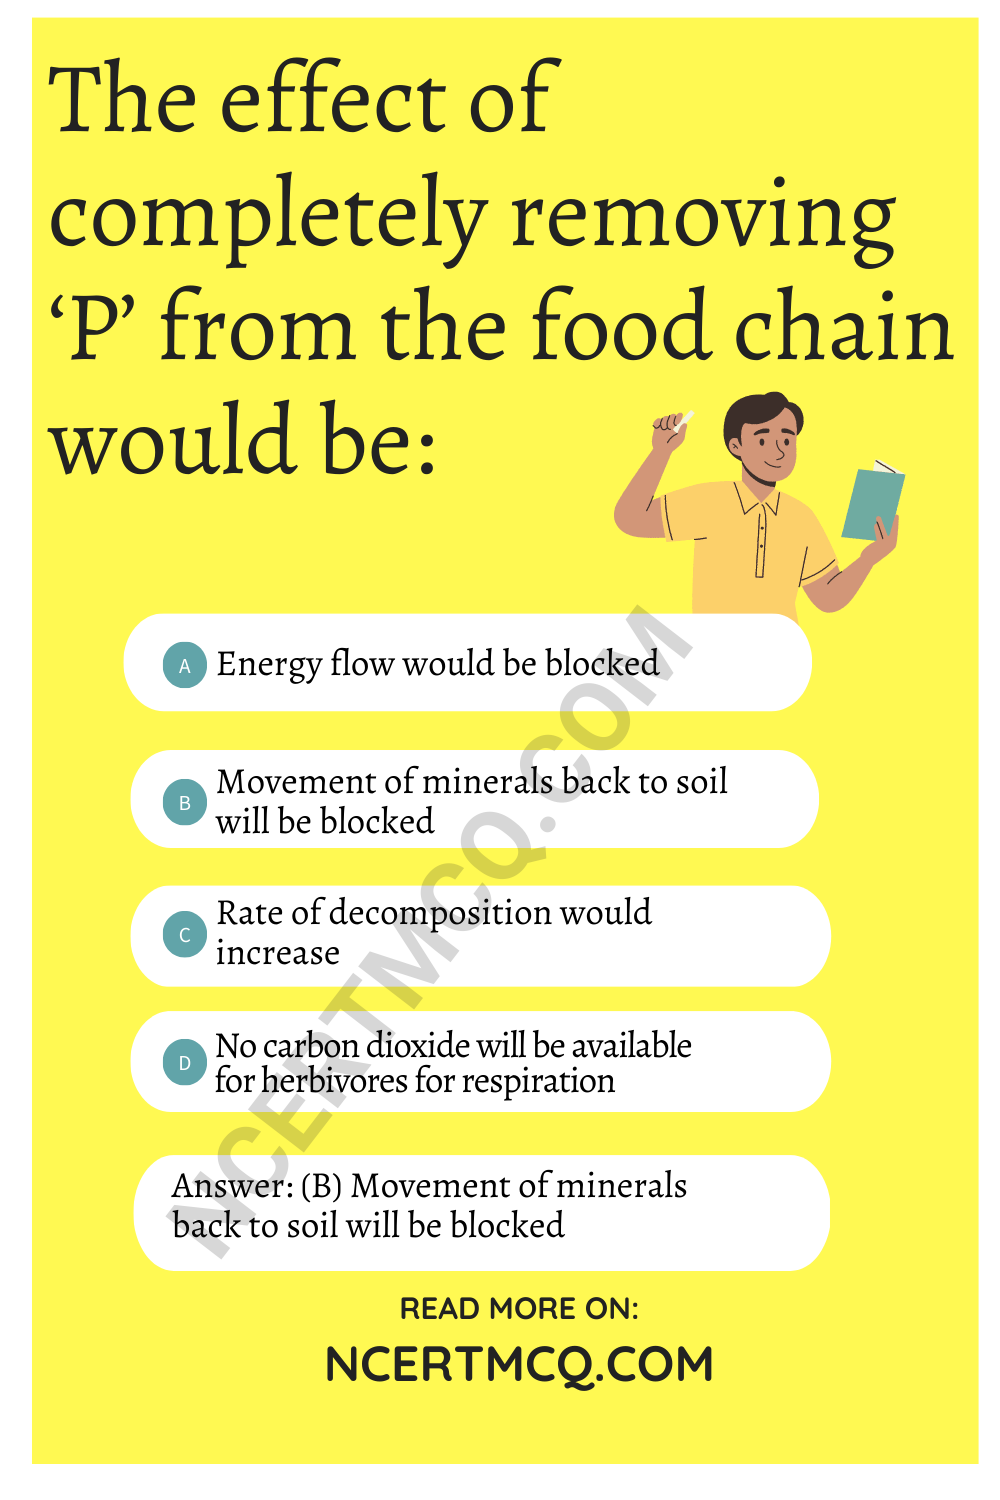 The effect of completely removing ‘P’ from the food chain would be: